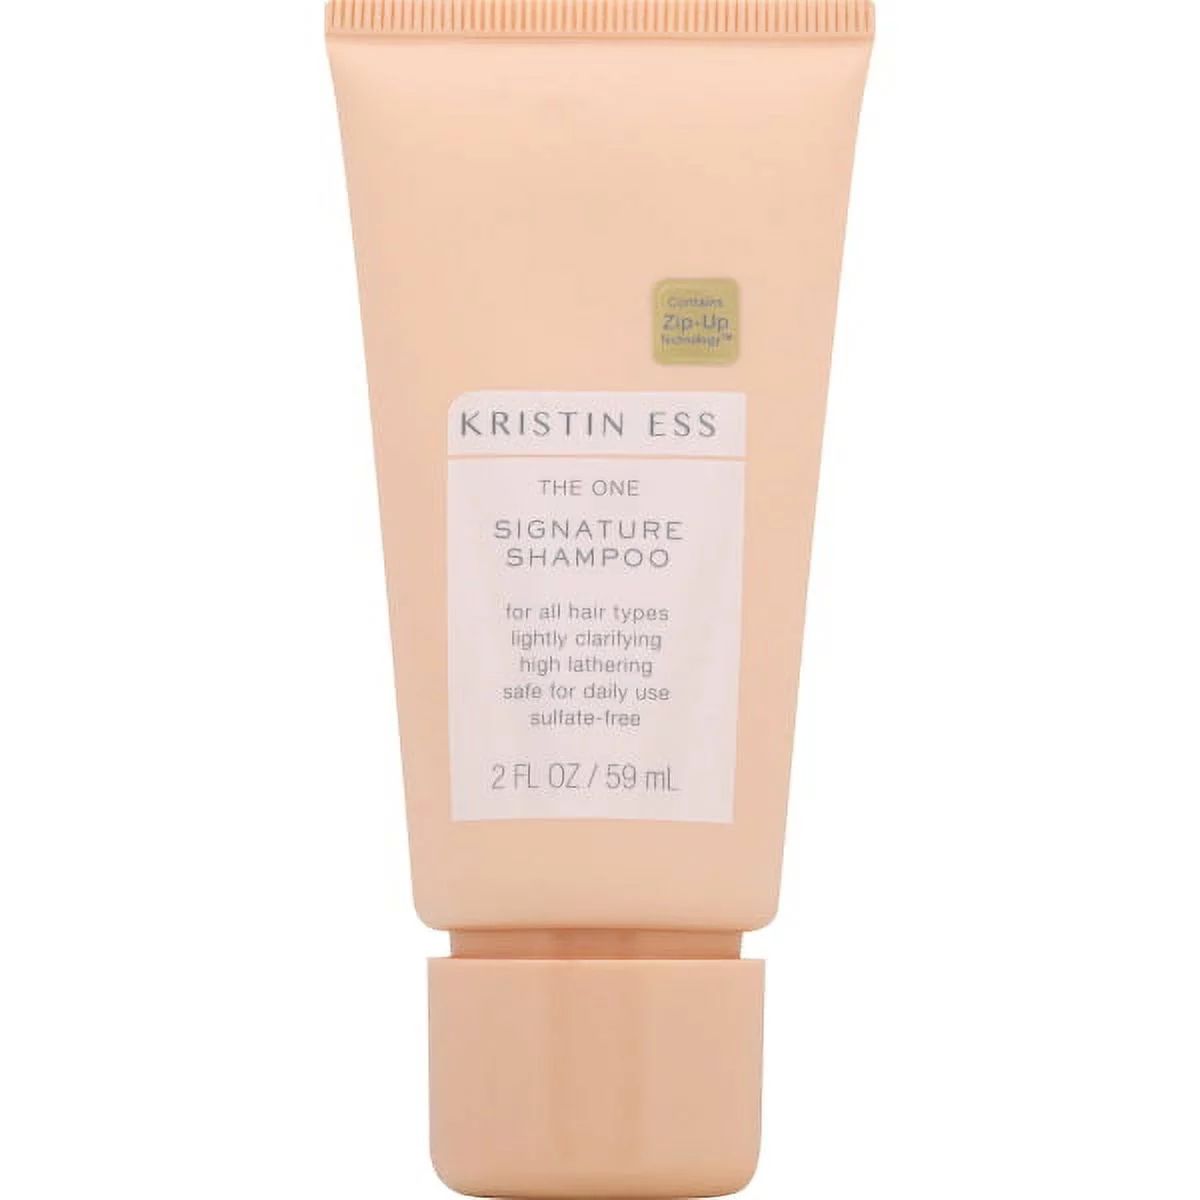 Kristin Ess The One Signature Shampoo for All Hair Types - Travel Size - 2 oz. | Walmart (US)